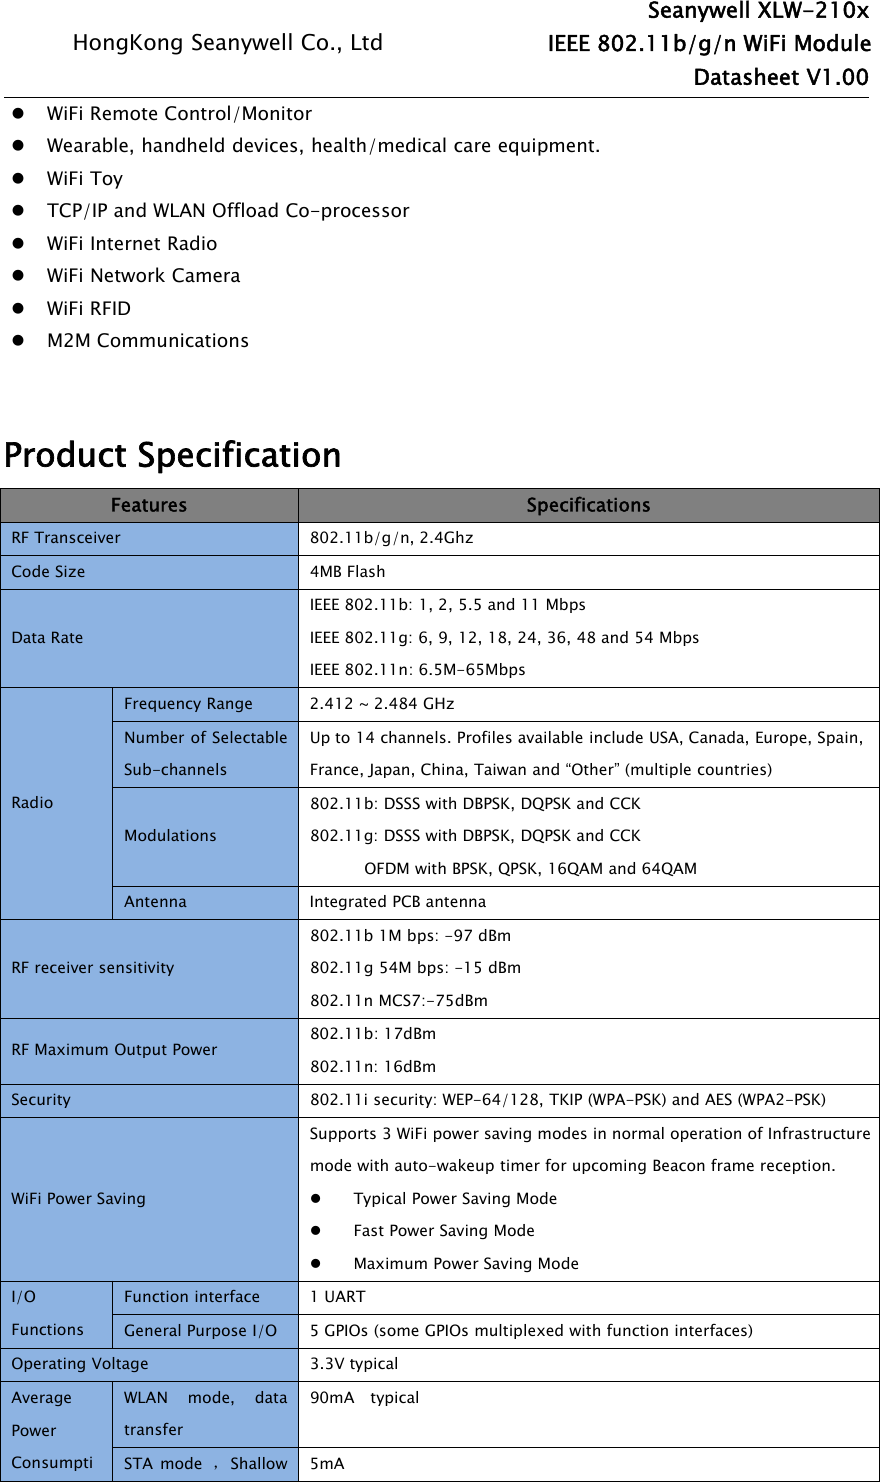 Seanywell XLW-210xHongKong Seanywell Co., Ltd IEEE 802.11b/g/n WiFi ModuleDatasheet V1.00WiFi Remote Control/MonitorWearable, handheld devices, health/medical care equipment.WiFi ToyTCP/IP and WLAN Offload Co-processorWiFi Internet RadioWiFi Network CameraWiFi RFIDM2M CommunicationsProduct SpecificationFeatures SpecificationsRF Transceiver 802.11b/g/n, 2.4GhzCode Size 4MB FlashData RateIEEE 802.11b: 1, 2, 5.5 and 11 MbpsIEEE 802.11g: 6, 9, 12, 18, 24, 36, 48 and 54 MbpsIEEE 802.11n: 6.5M-65MbpsRadioFrequency Range 2.412 ~ 2.484 GHzNumber of SelectableSub-channelsUp to 14 channels. Profiles available include USA, Canada, Europe, Spain,France, Japan, China, Taiwan and “Other” (multiple countries)Modulations802.11b: DSSS with DBPSK, DQPSK and CCK802.11g: DSSS with DBPSK, DQPSK and CCKOFDM with BPSK, QPSK, 16QAM and 64QAMAntenna Integrated PCB antennaRF receiver sensitivity802.11b 1M bps: -97 dBm802.11g 54M bps: -15 dBm802.11n MCS7:-75dBmRF Maximum Output Power802.11b: 17dBm802.11n: 16dBmSecurity 802.11i security: WEP-64/128, TKIP (WPA-PSK) and AES (WPA2-PSK)WiFi Power SavingSupports 3 WiFi power saving modes in normal operation of Infrastructuremode with auto-wakeup timer for upcoming Beacon frame reception.Typical Power Saving ModeFast Power Saving ModeMaximum Power Saving ModeI/OFunctionsFunction interface 1 UARTGeneral Purpose I/O 5 GPIOs (some GPIOs multiplexed with function interfaces)Operating Voltage 3.3V typicalAveragePowerConsumptiWLAN mode, datatransfer90mA typicalSTA mode ，Shallow 5mA